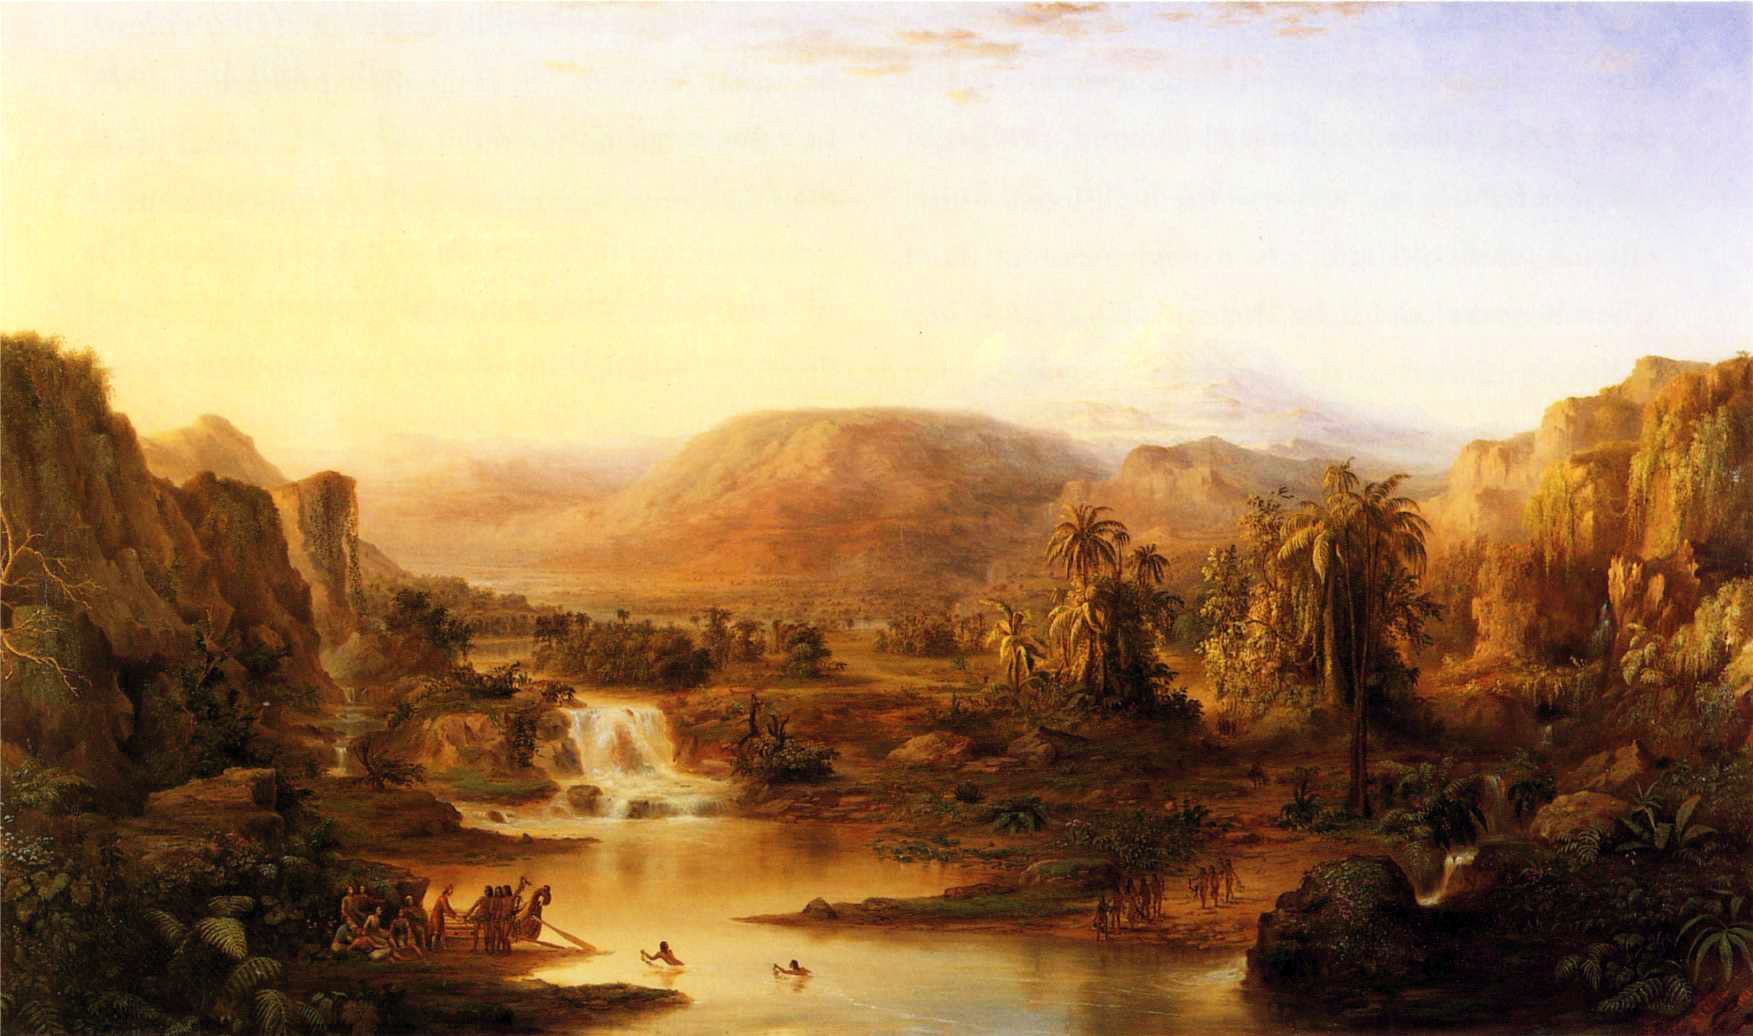 A large scene depicting mountains and a body of water under a hazy sky while people are seen in the distance in the water.